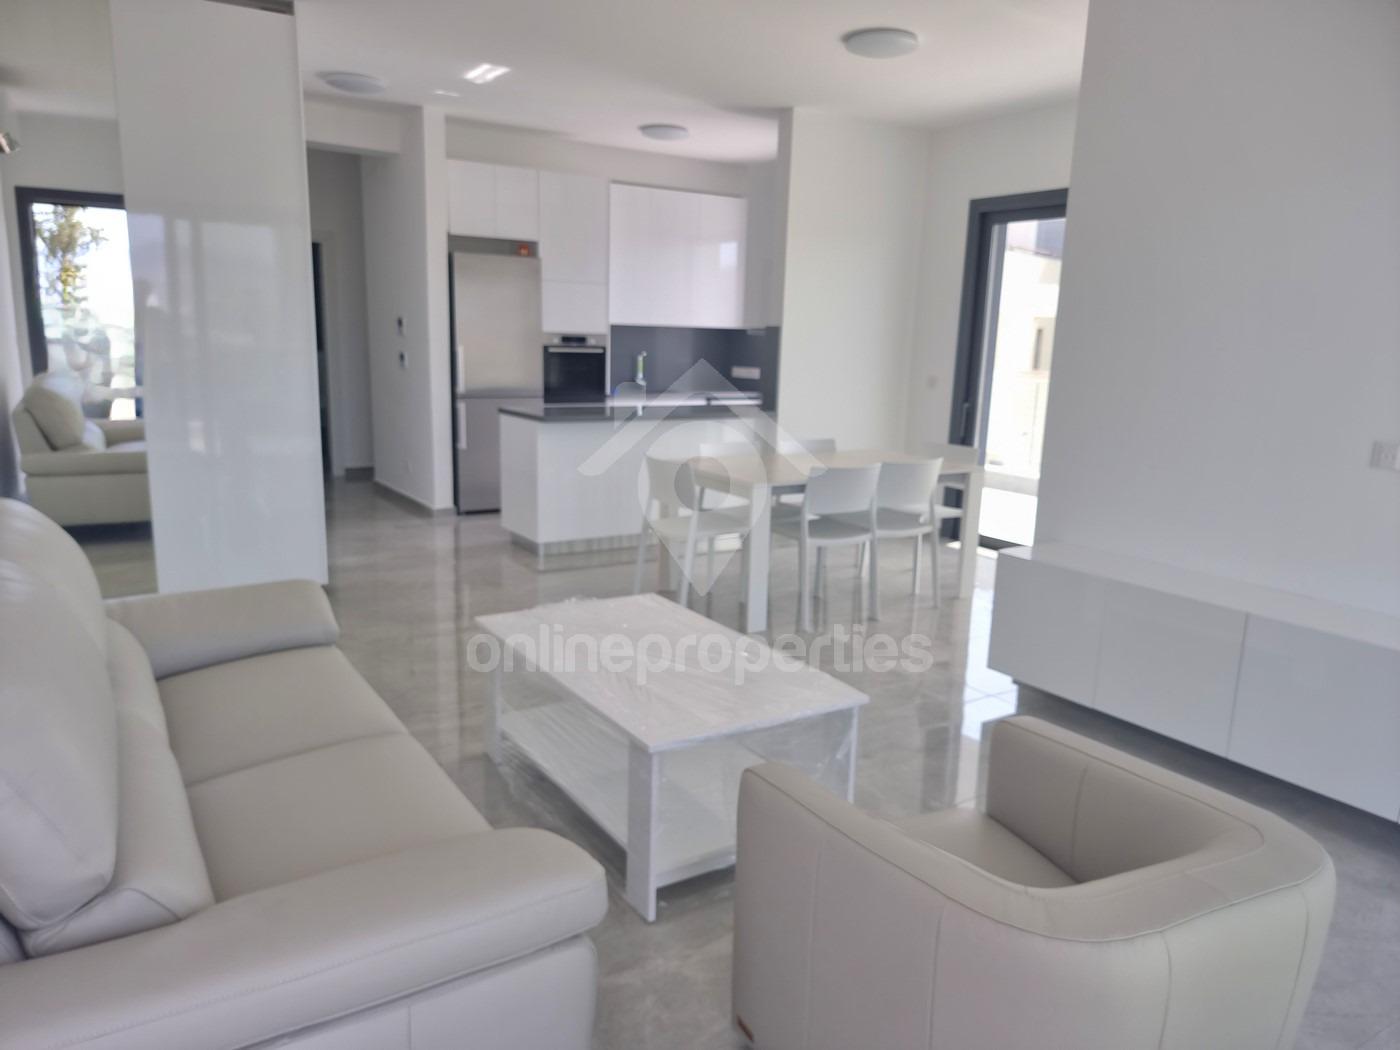 Brand new modern furnished 2-bedroom flat near the city center